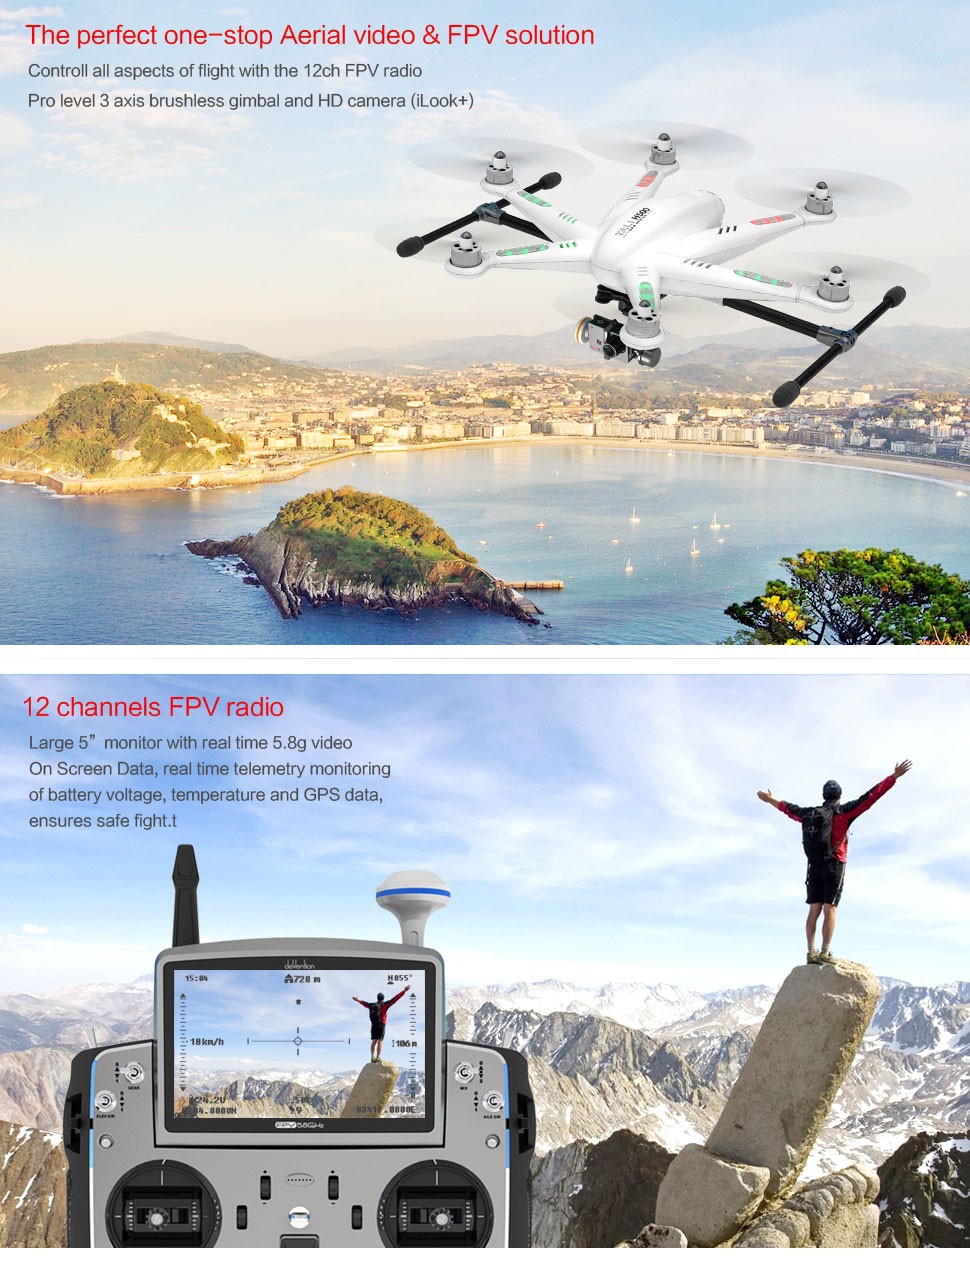 dji phantom 2 vision plus pk Walkera TALI H500 Perfect one-stop FPV Drone RTF Hexrcopter with G-3D Gimbal iLook+ Camera IMAX B6 Charger Transmitter